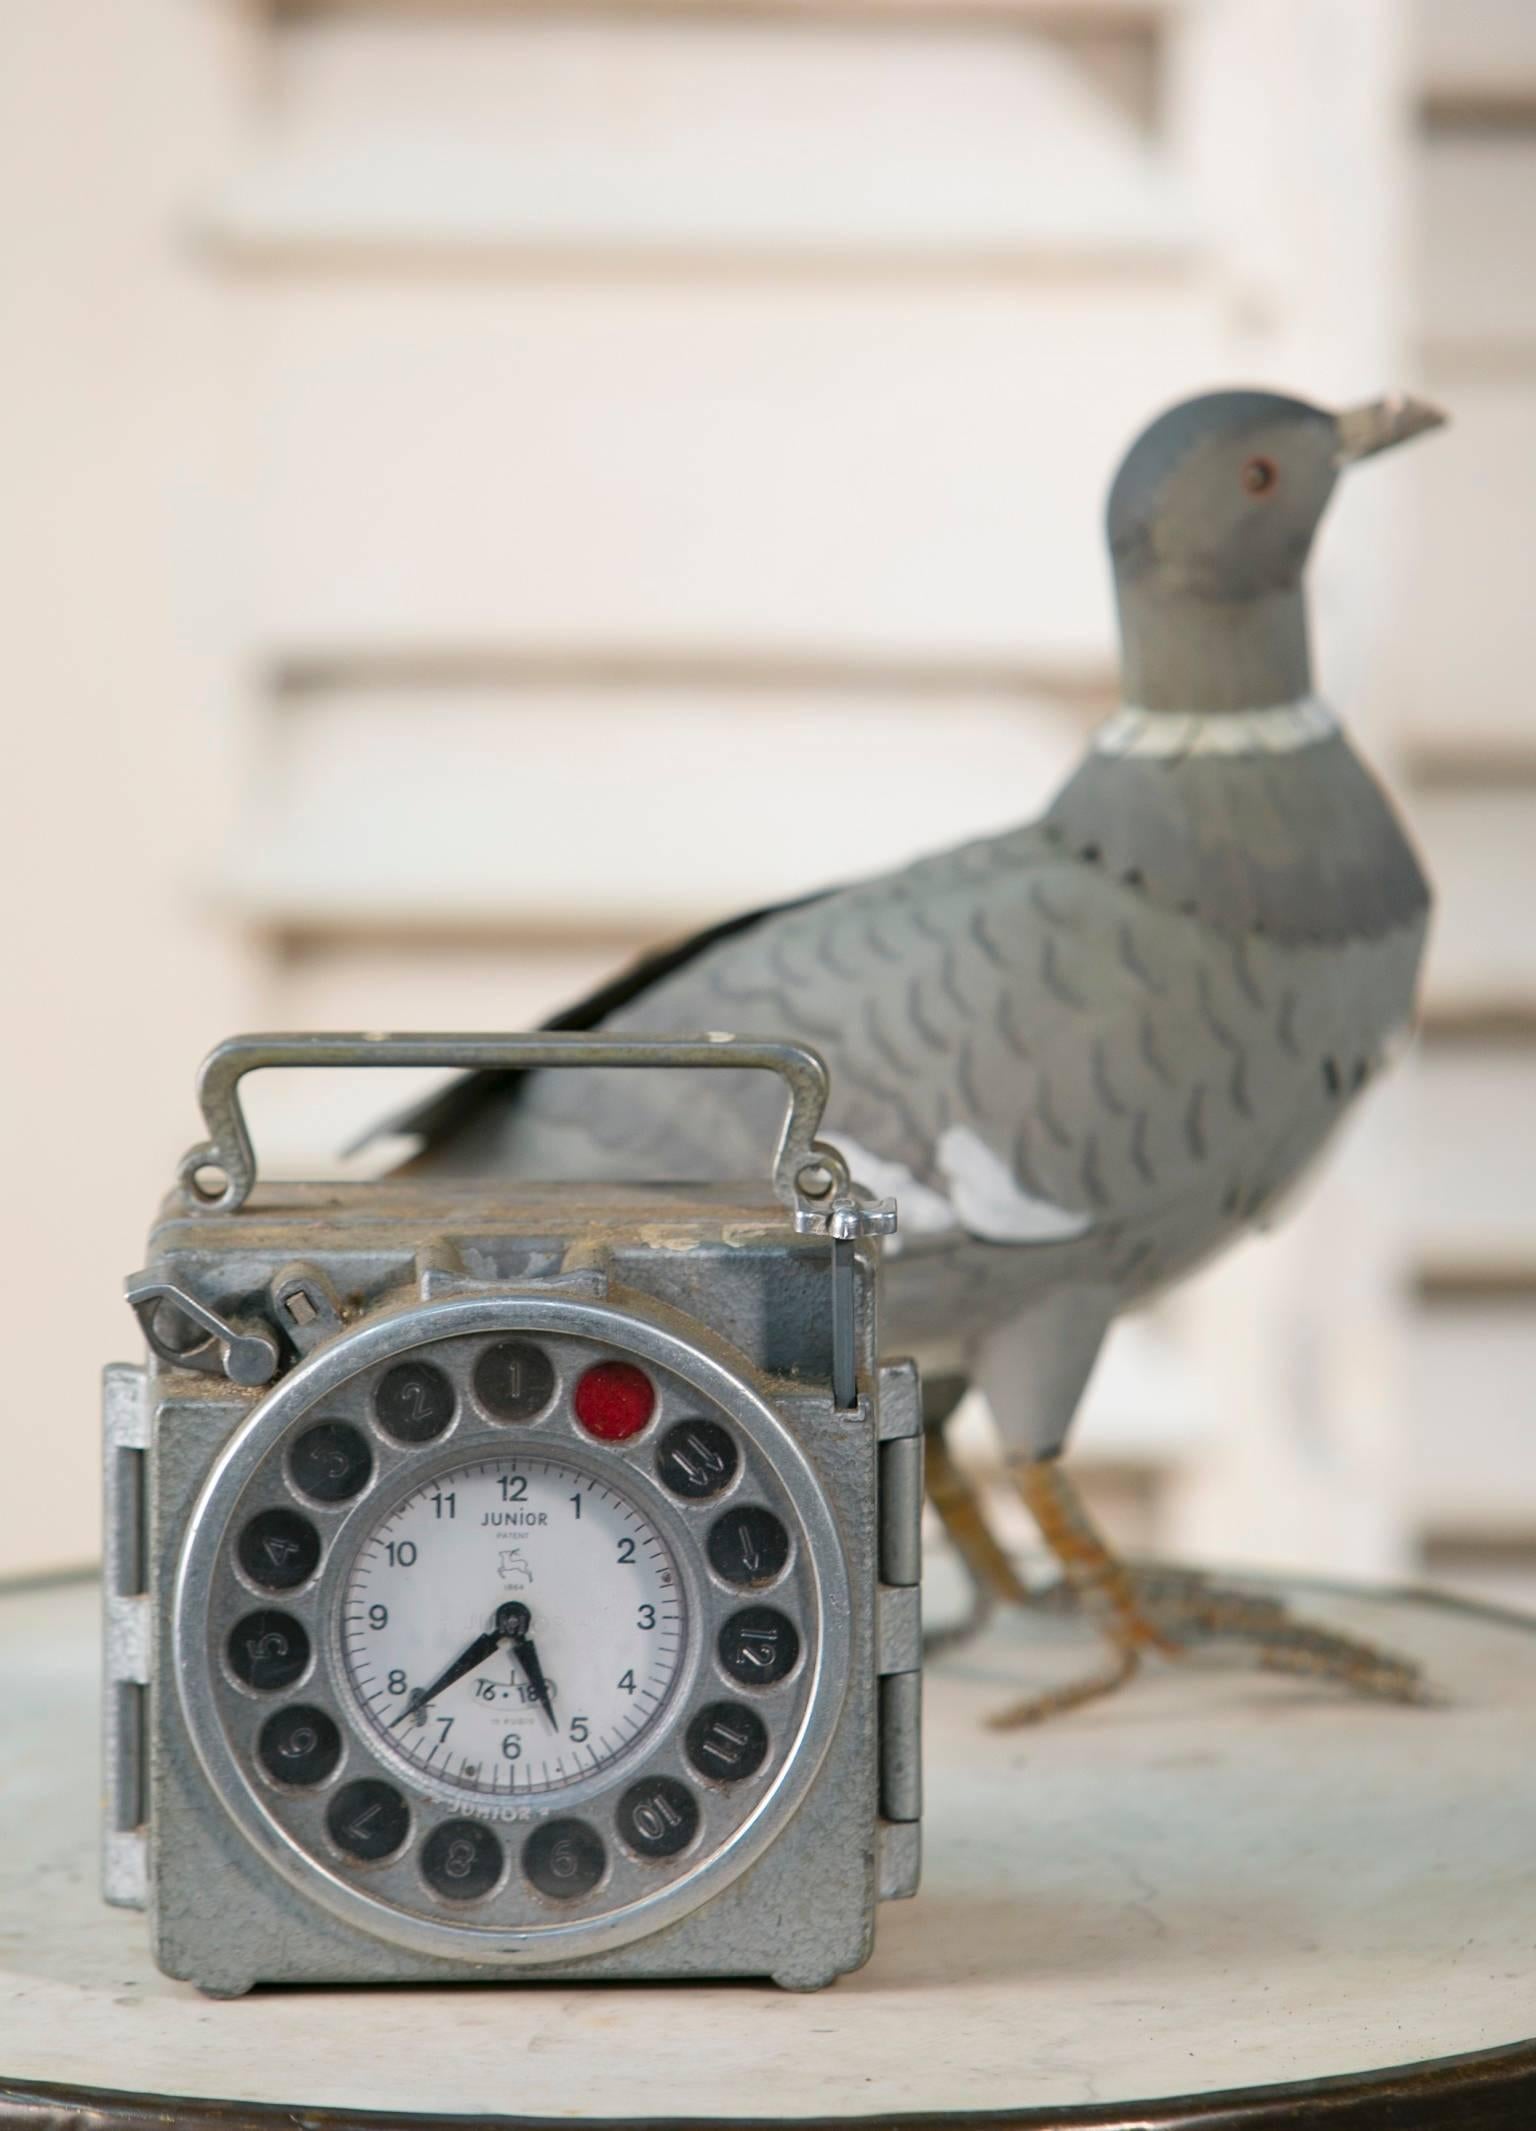 Vintage clock by Junior, from Antwerp, Belgium. Used for timing pigeon races. 
Multiples available. Price is for one.